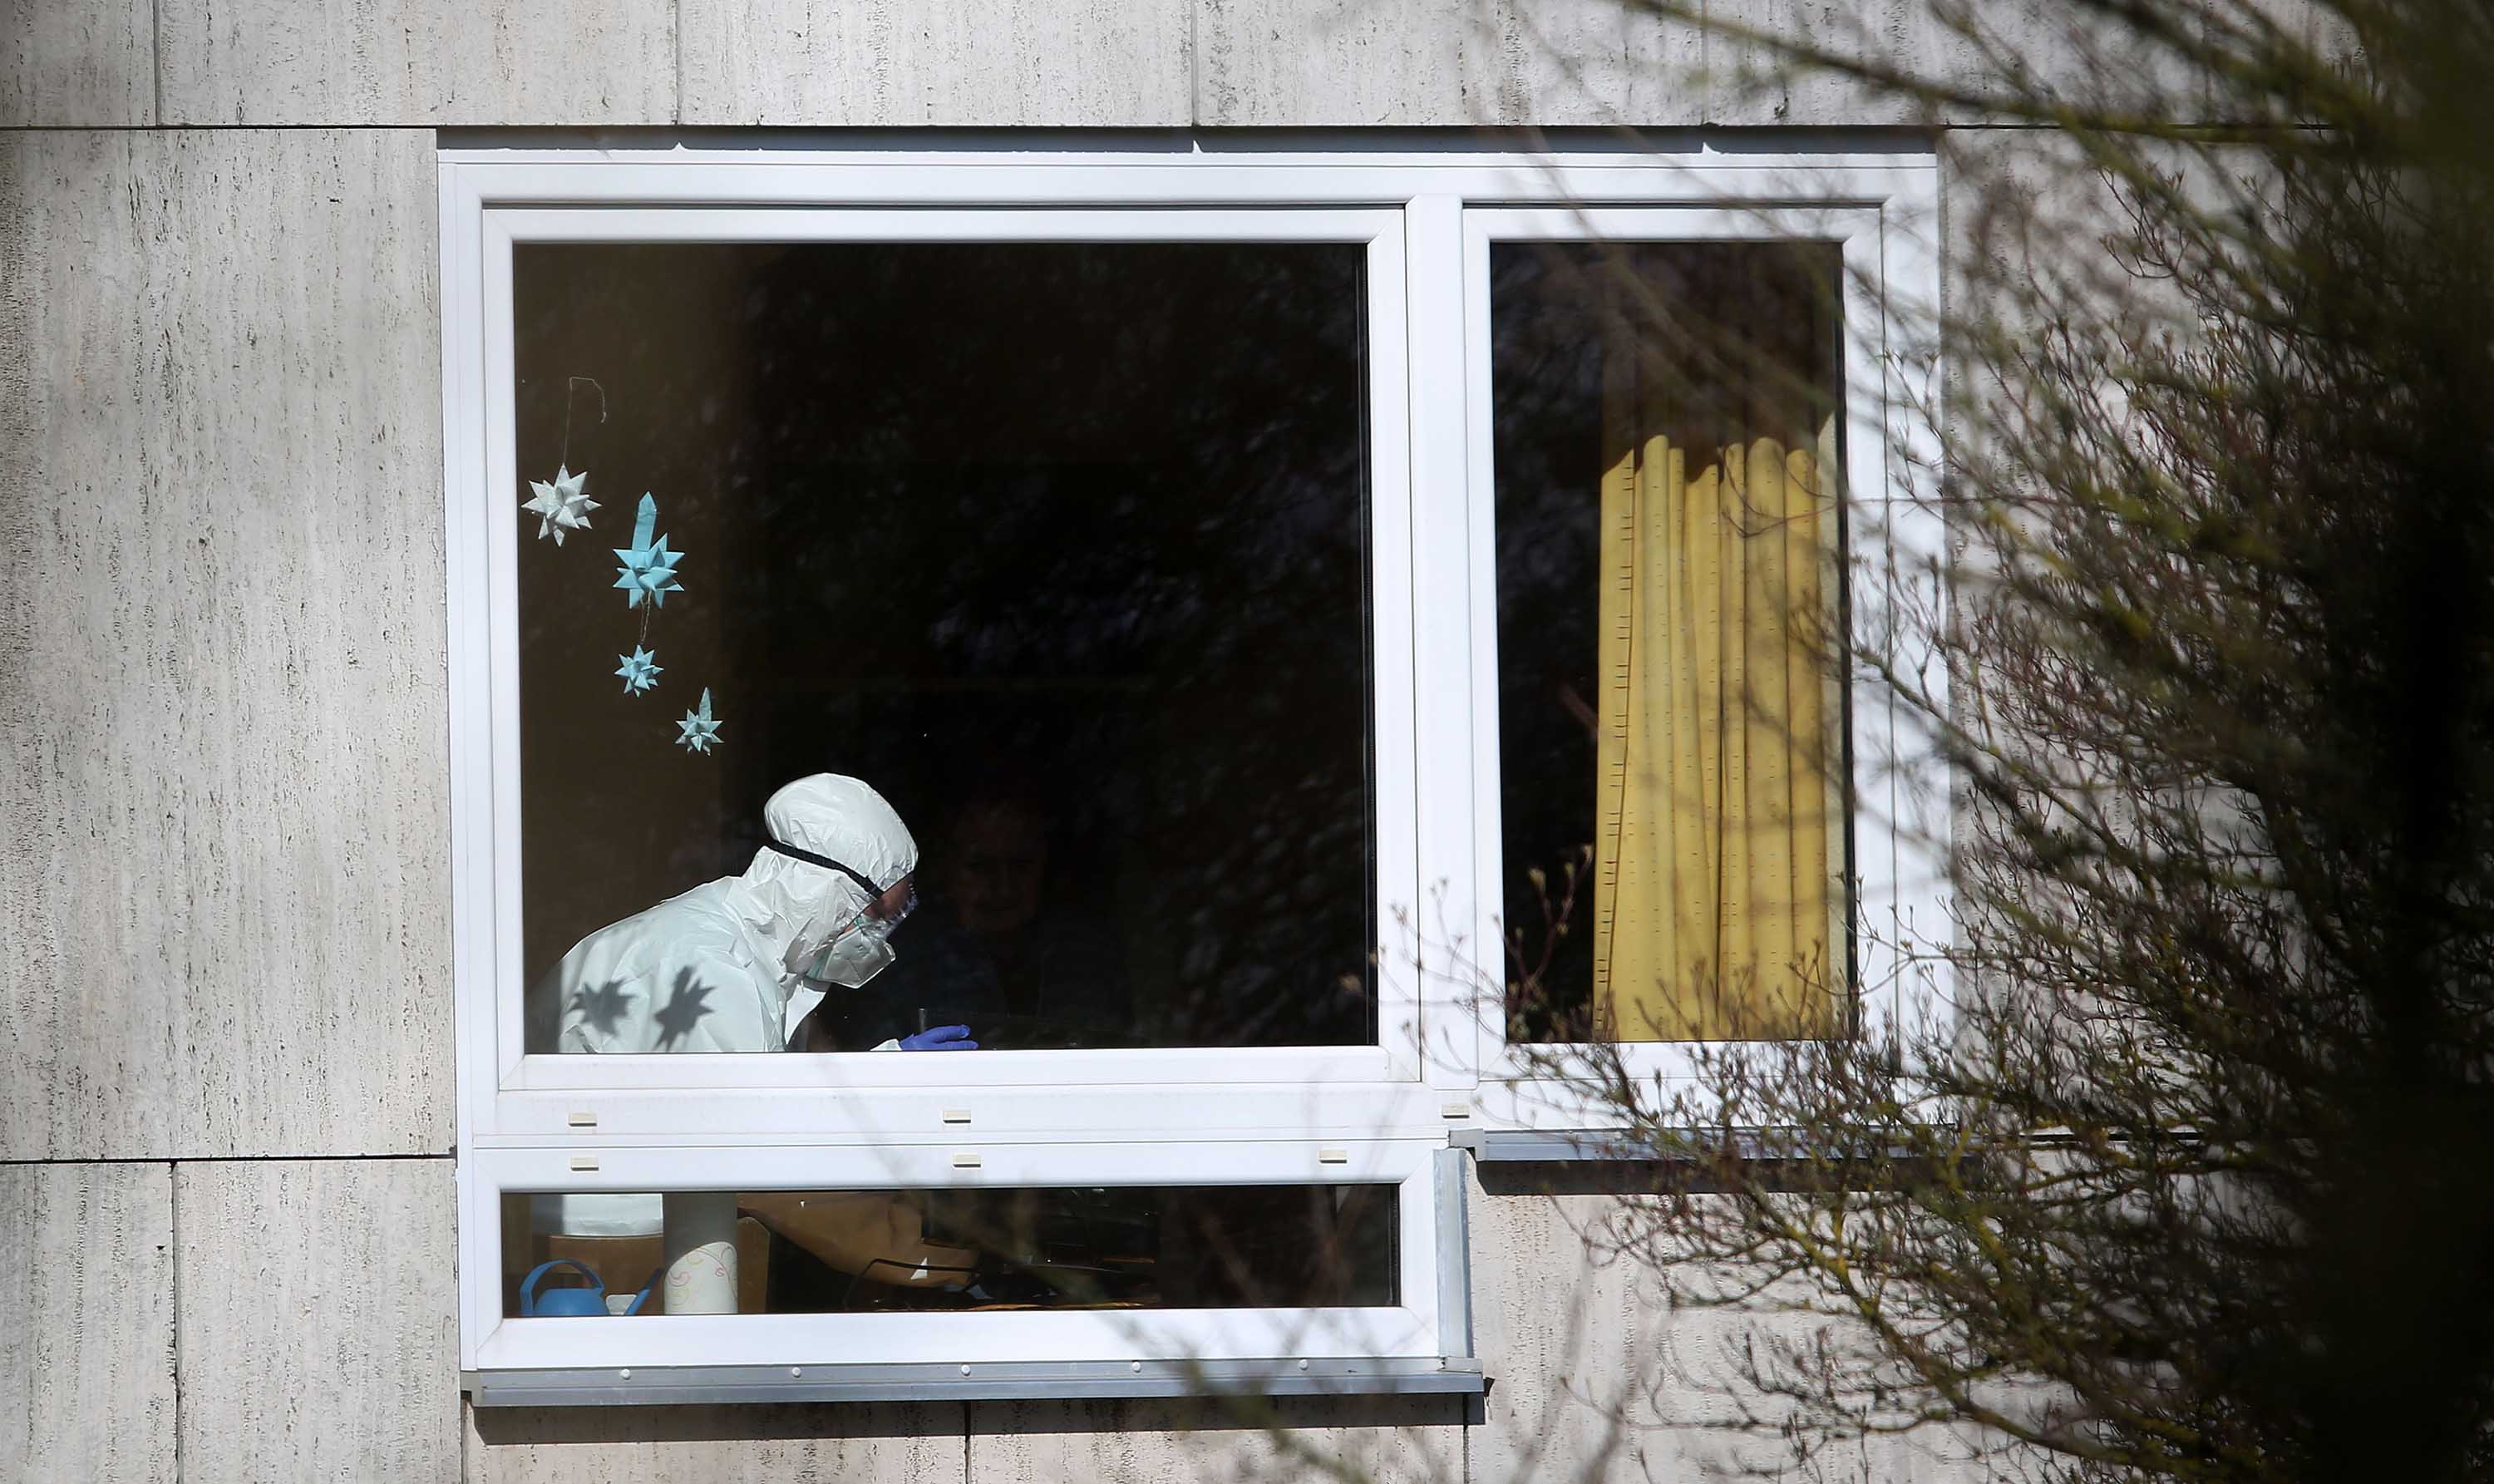 An employee works inside the Hanns-Lilje-Heim senior care home on March 31, in Wolfsburg, Germany, where coronavirus cases have been detected among residents.